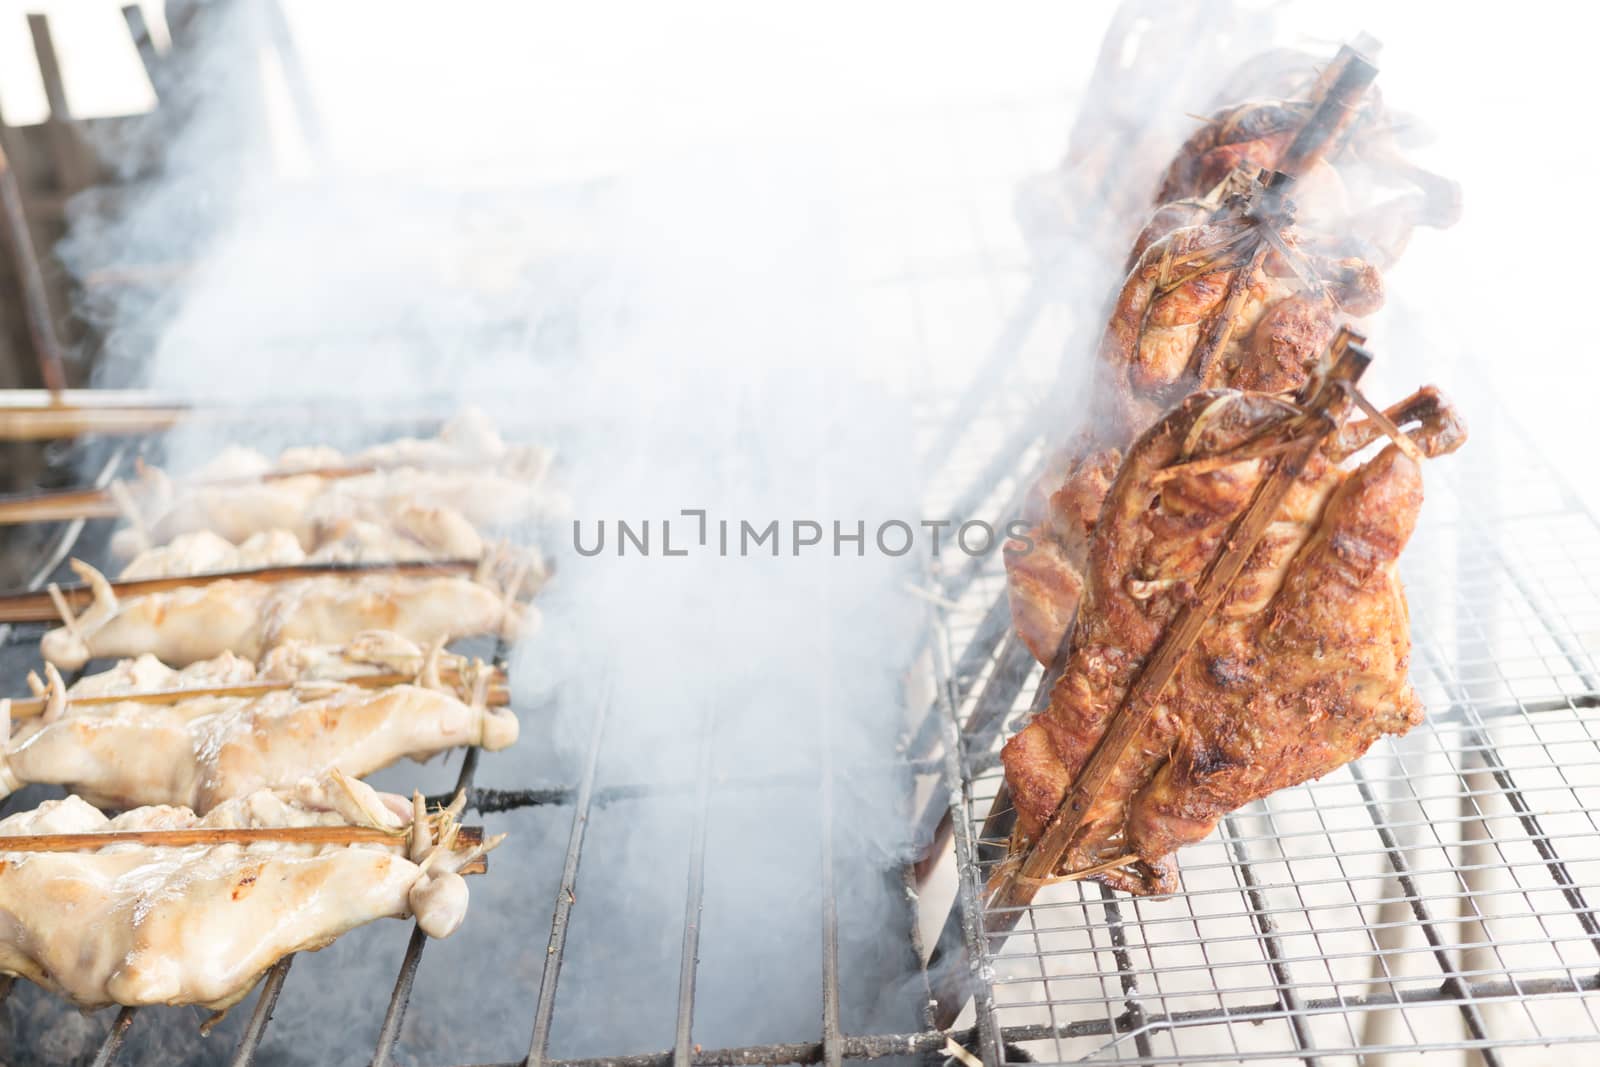 Grilled chicken
 with smoke causes of cancer by frank600